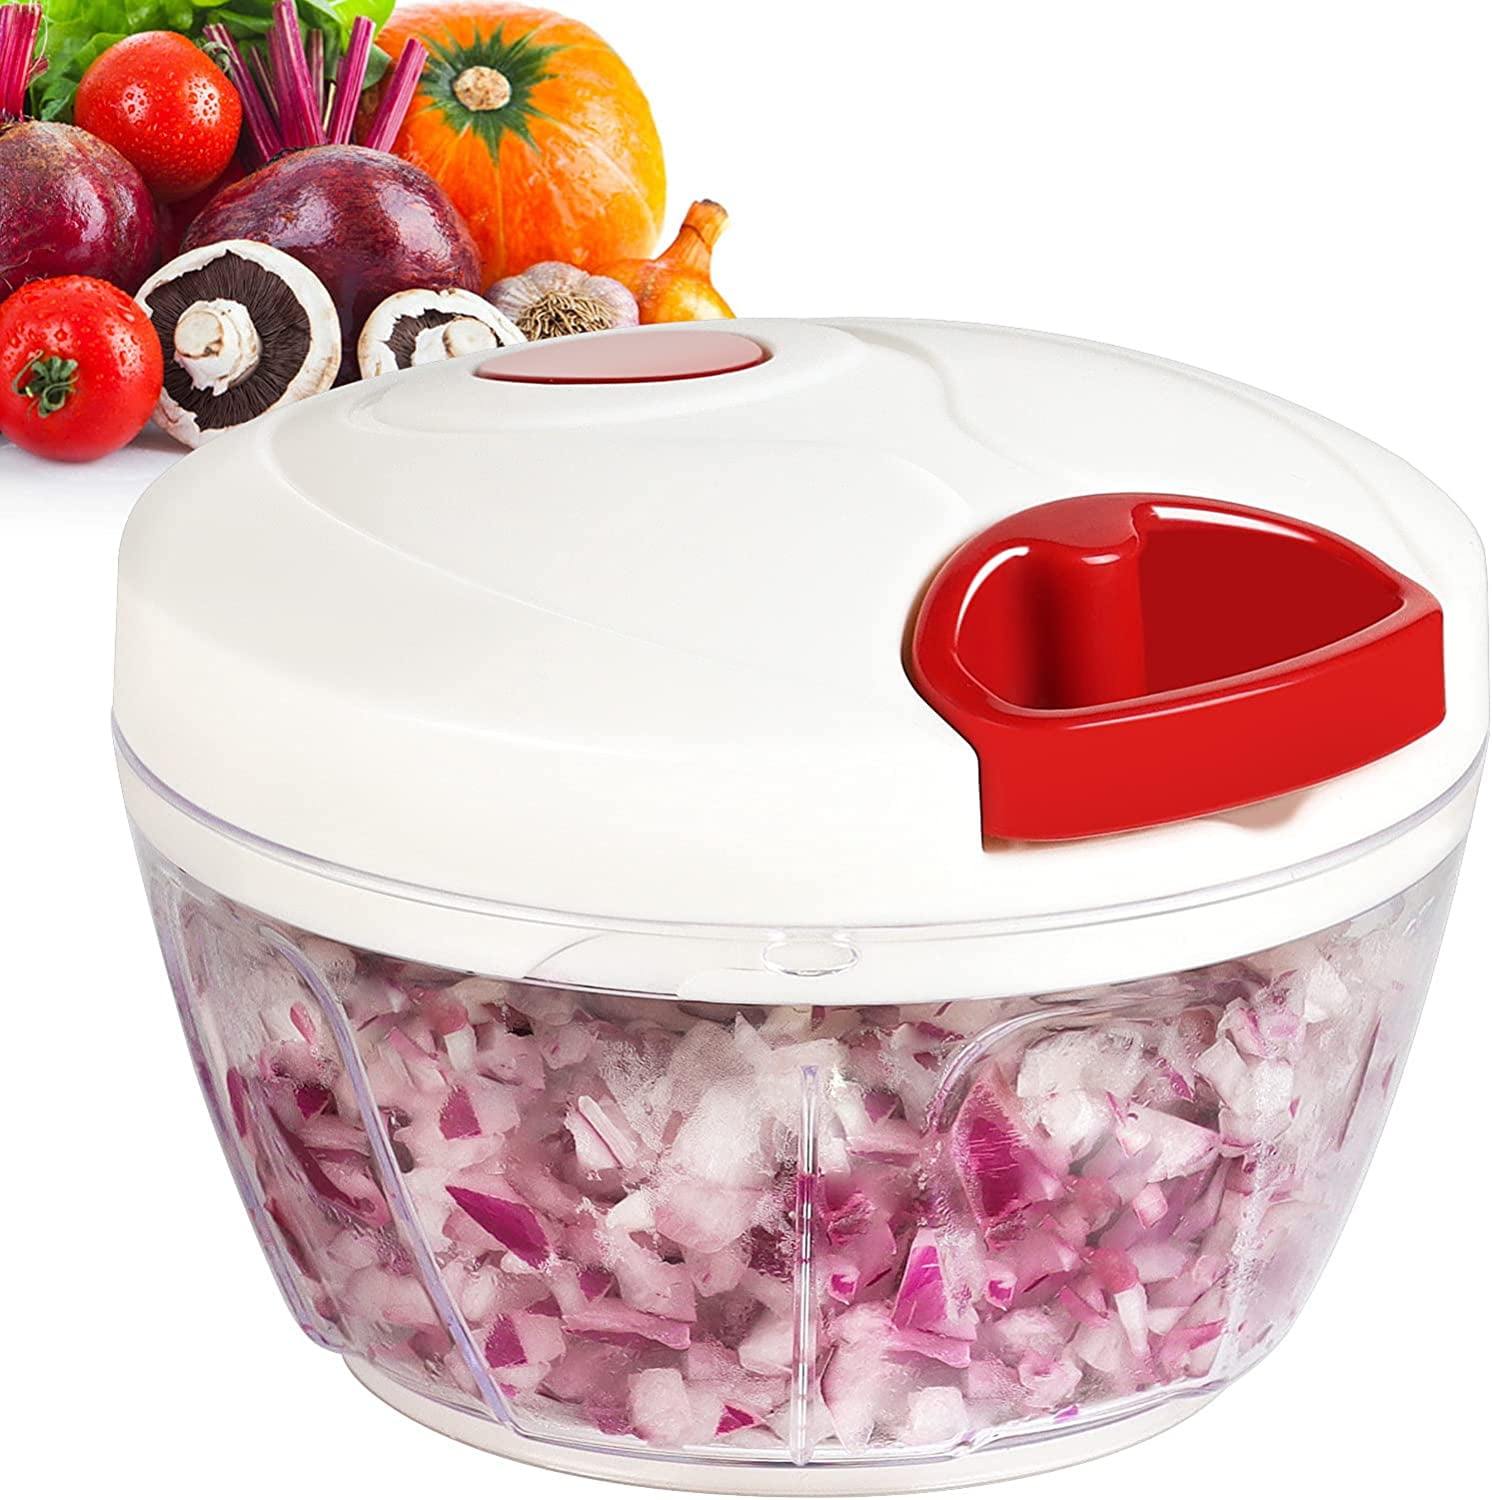 Manual Food Processor Vegetable Chopper, Geedel Pull Cutter with String for  Veggies, Fruits, Salad, Onion, Ginger, Nuts, Herbs, etc, 2 Cup(500ml), Red